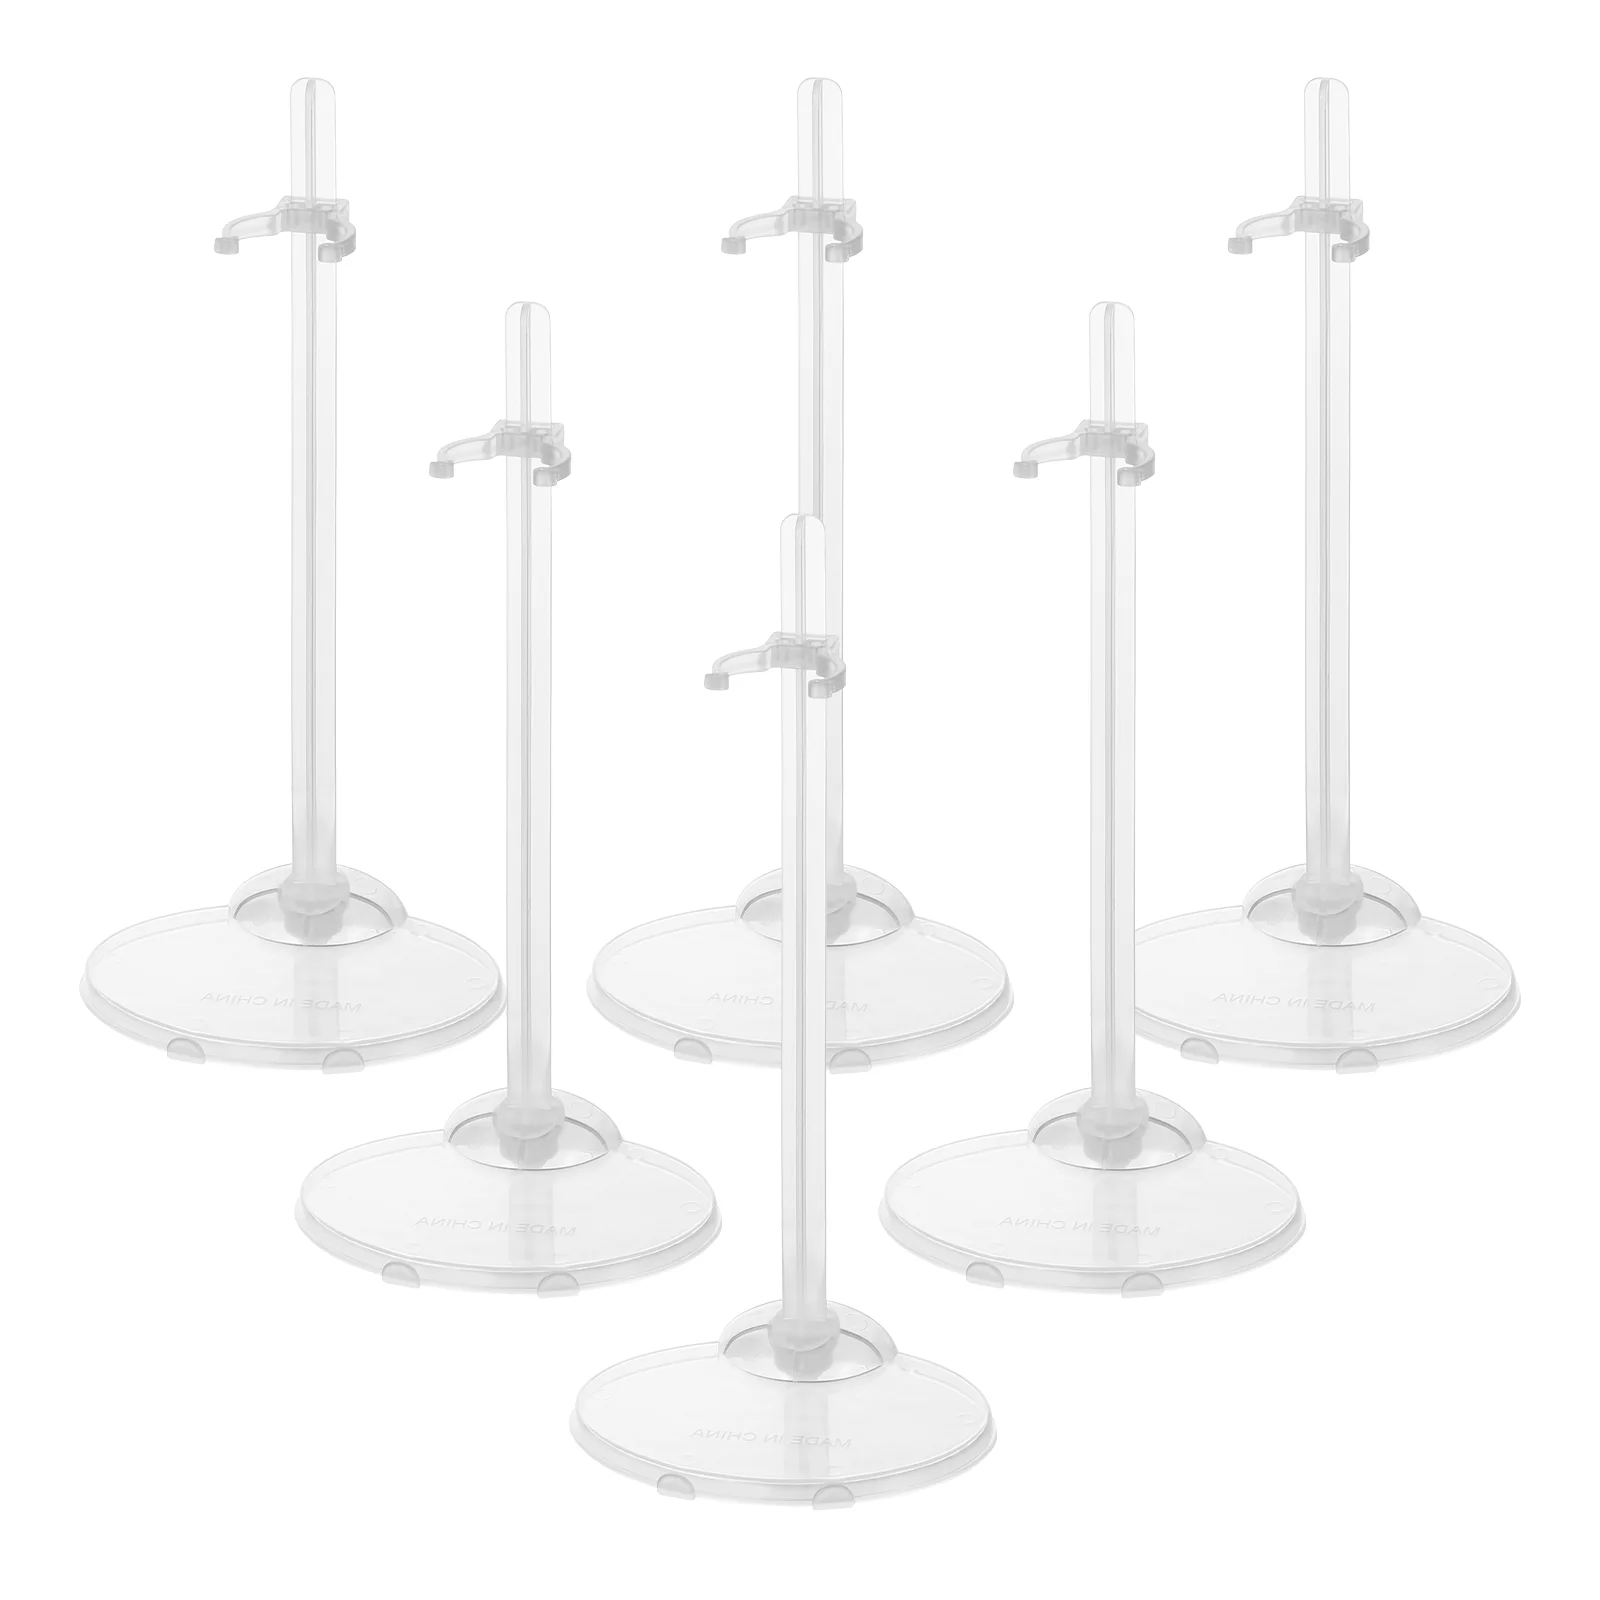 Doll Holding Stand Doll Support Display Rack Adjustable Transparent Model Furniture Plastic Mannequin Dolls Accessories dolls display stand clothes hangers dress model for dressing display